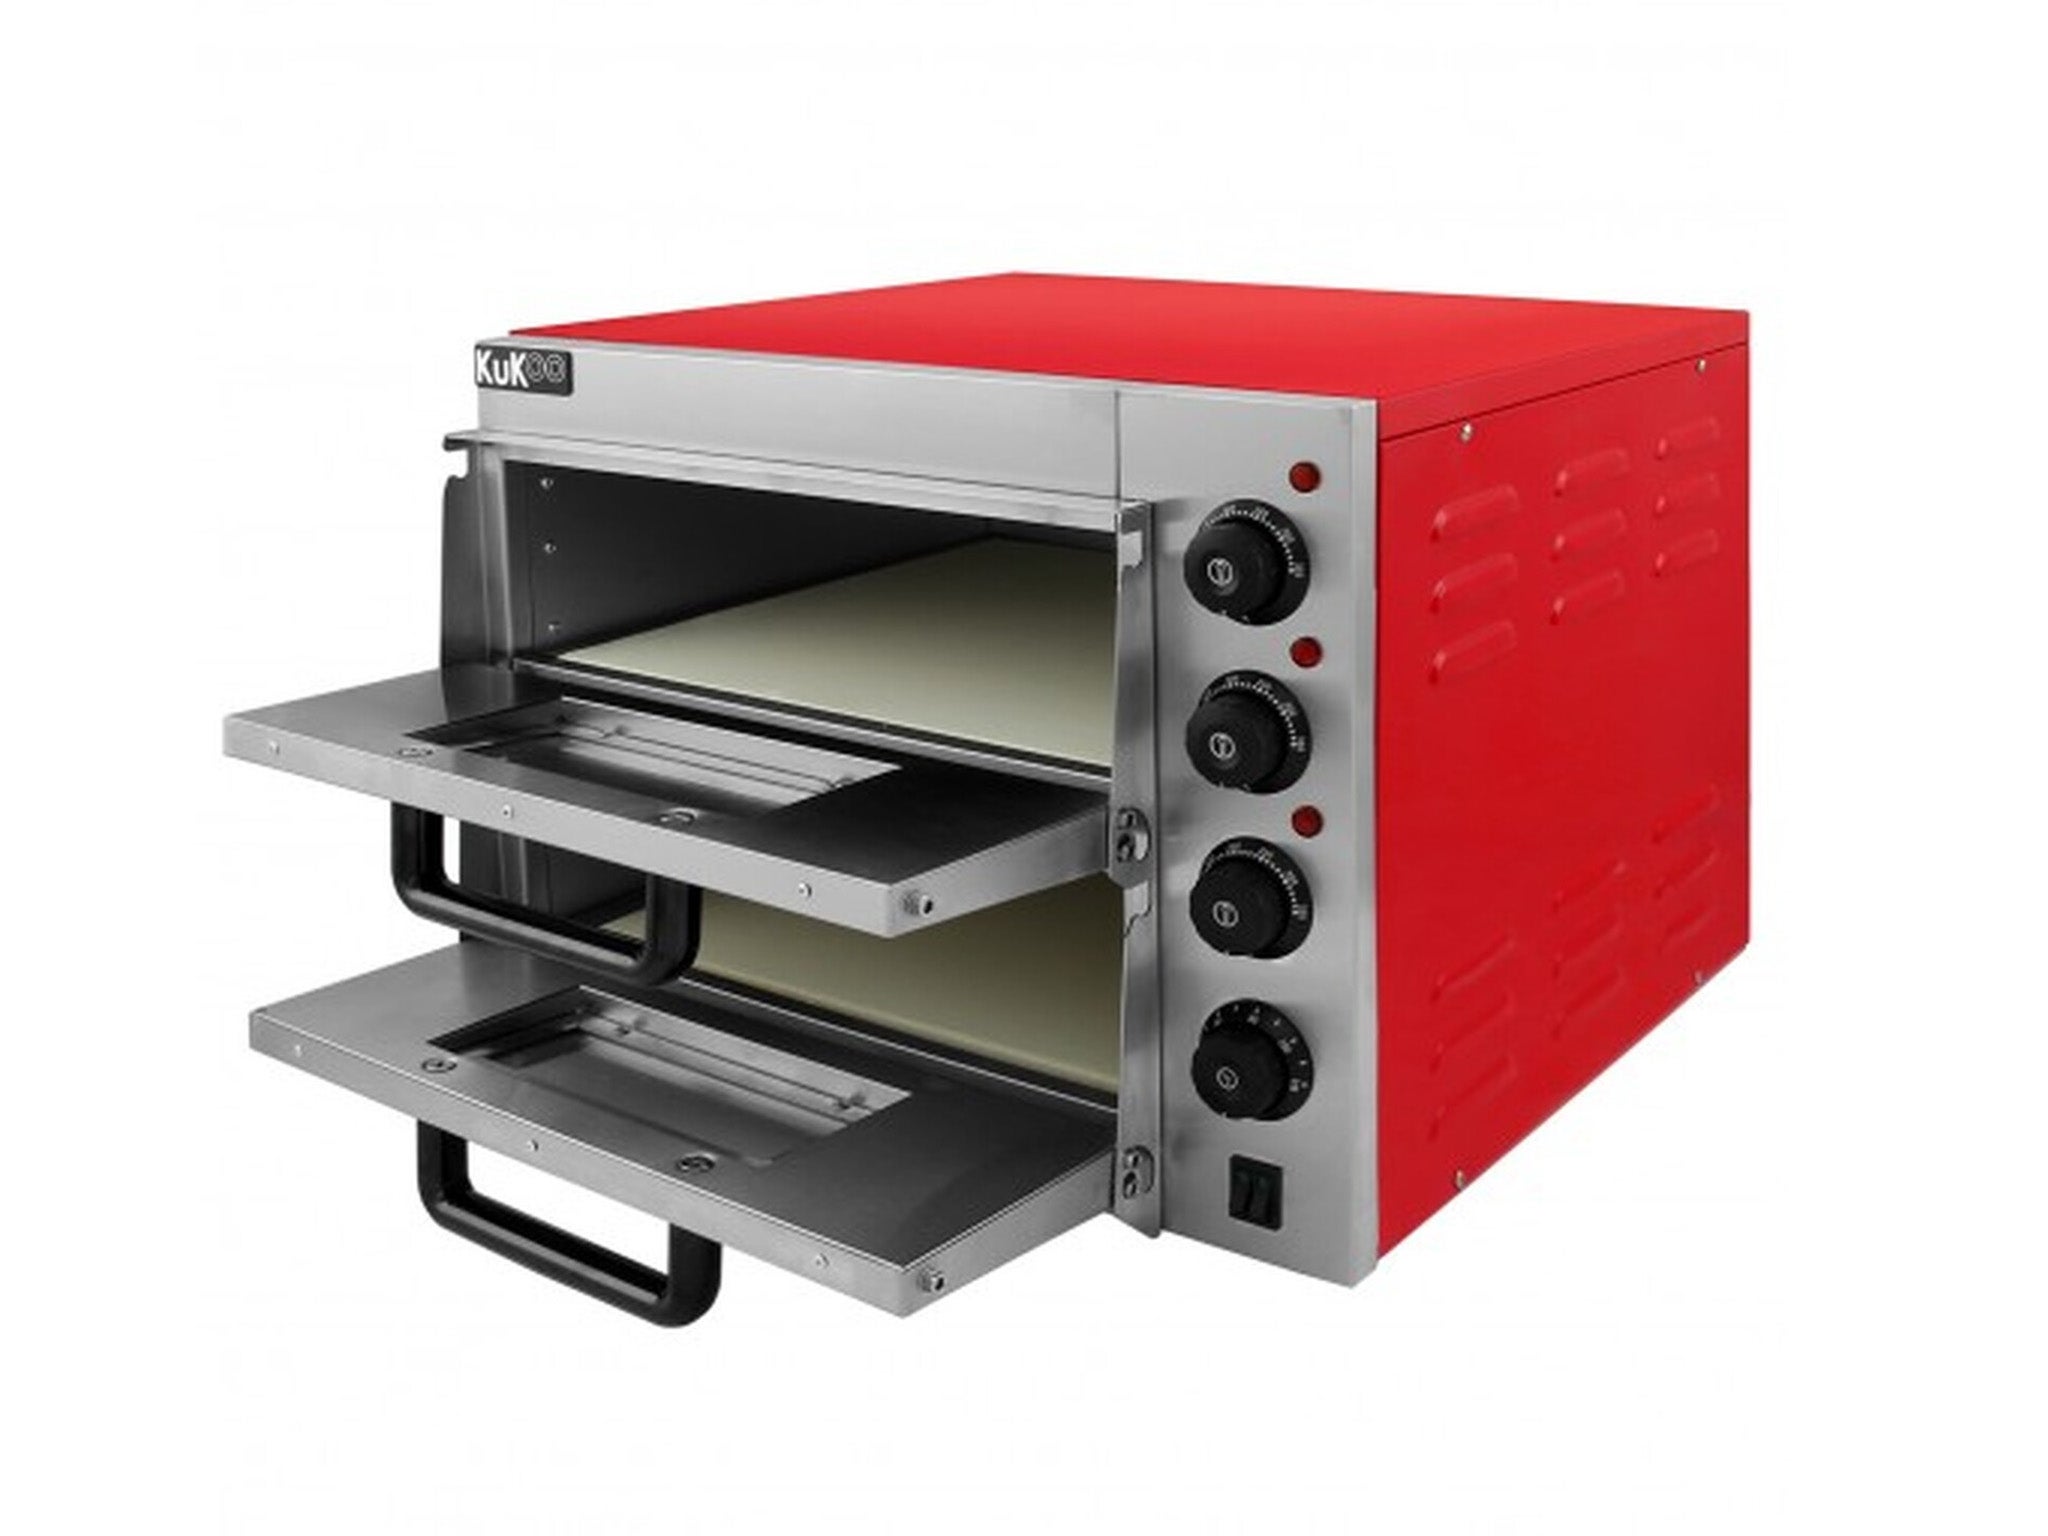 KuKoo 16 Twin Deck Electric Pizza Oven - Red indybest